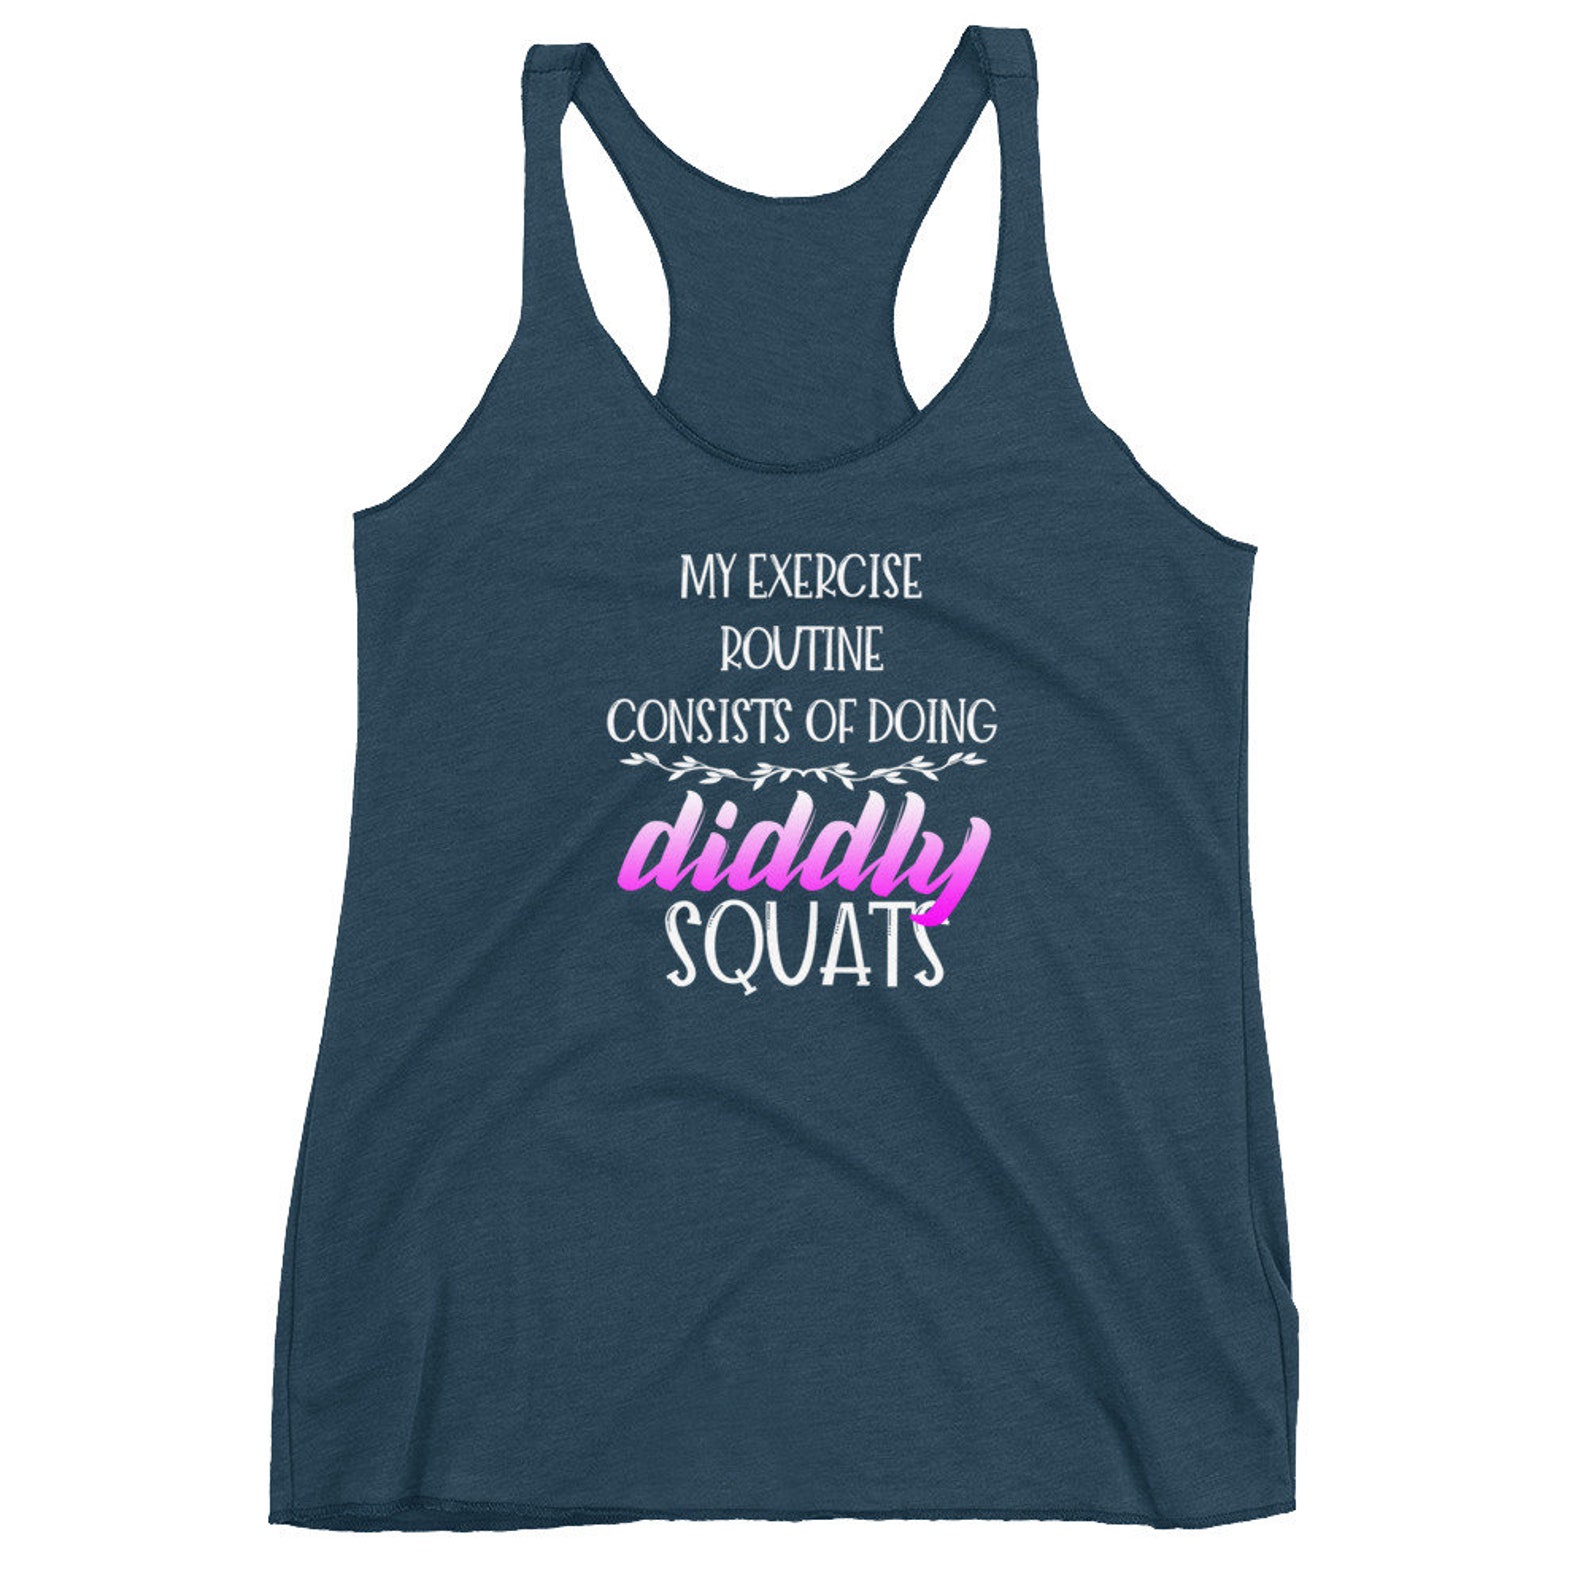 My Exercise Routine Consist of Doing Diddly Squats Crossfit - Etsy